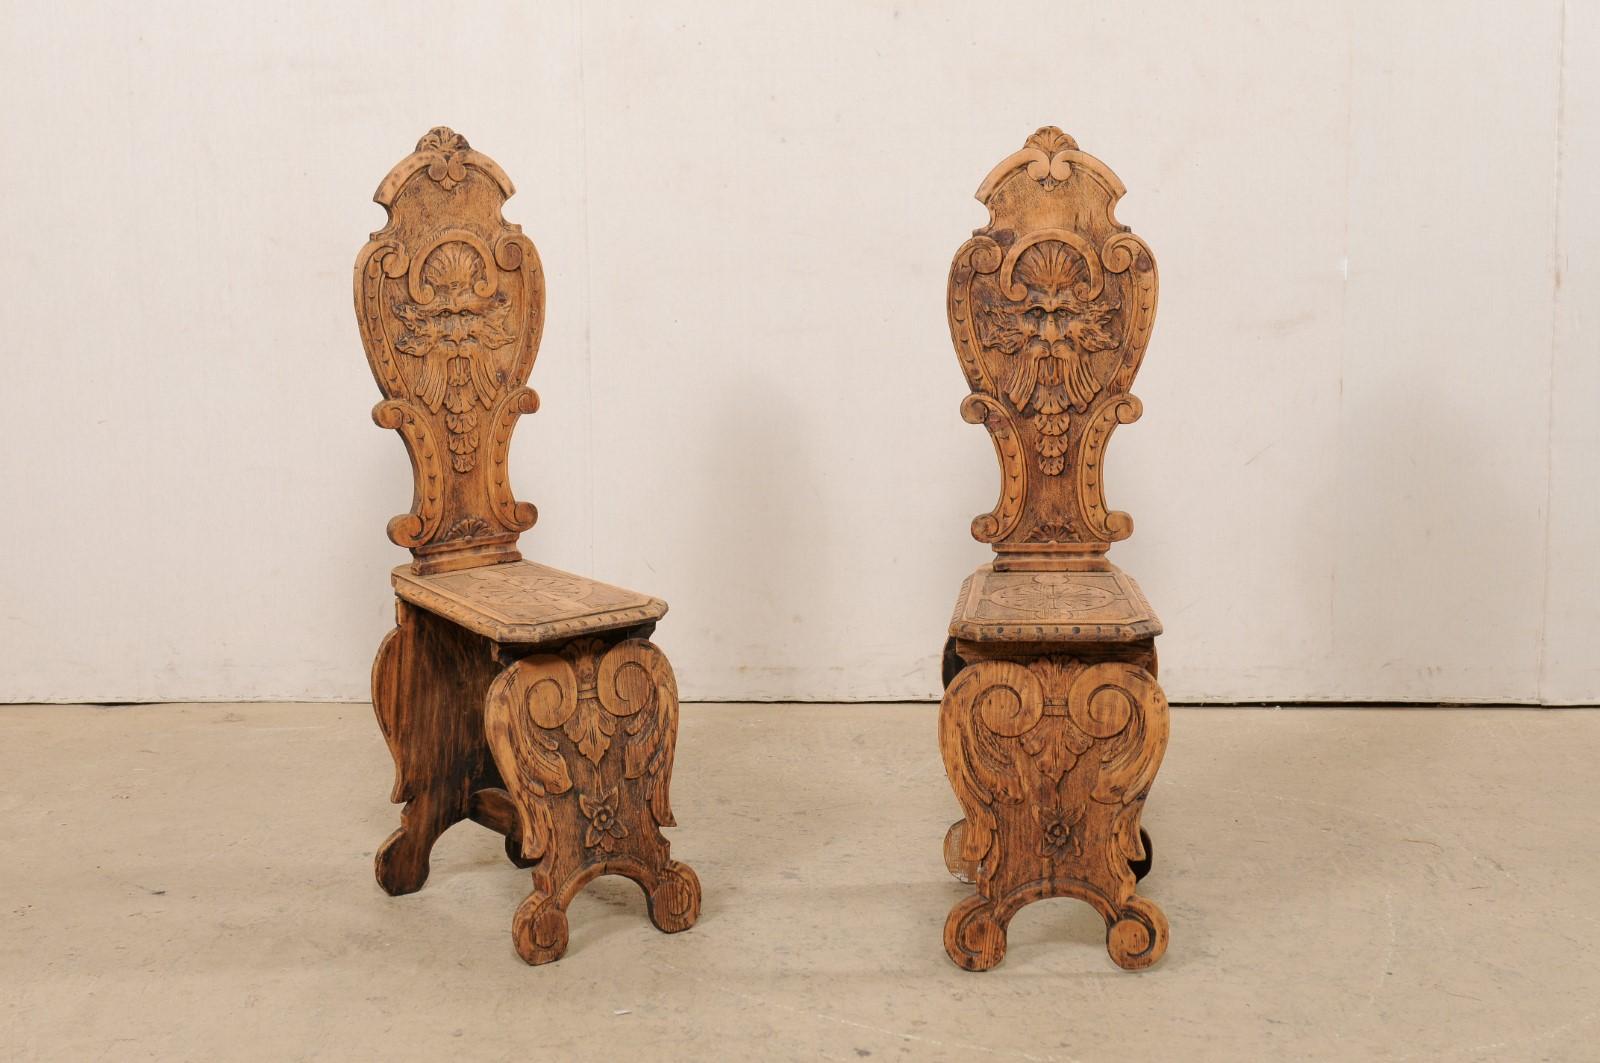 An Italian pair of Renaissance style Sgabelli chairs from the turn of the 19th and 20th century. This pair of antique wood chairs from Italy, (often referred to as a Sgabello chair; an elaborately carved hall chair intended primarily for decorative